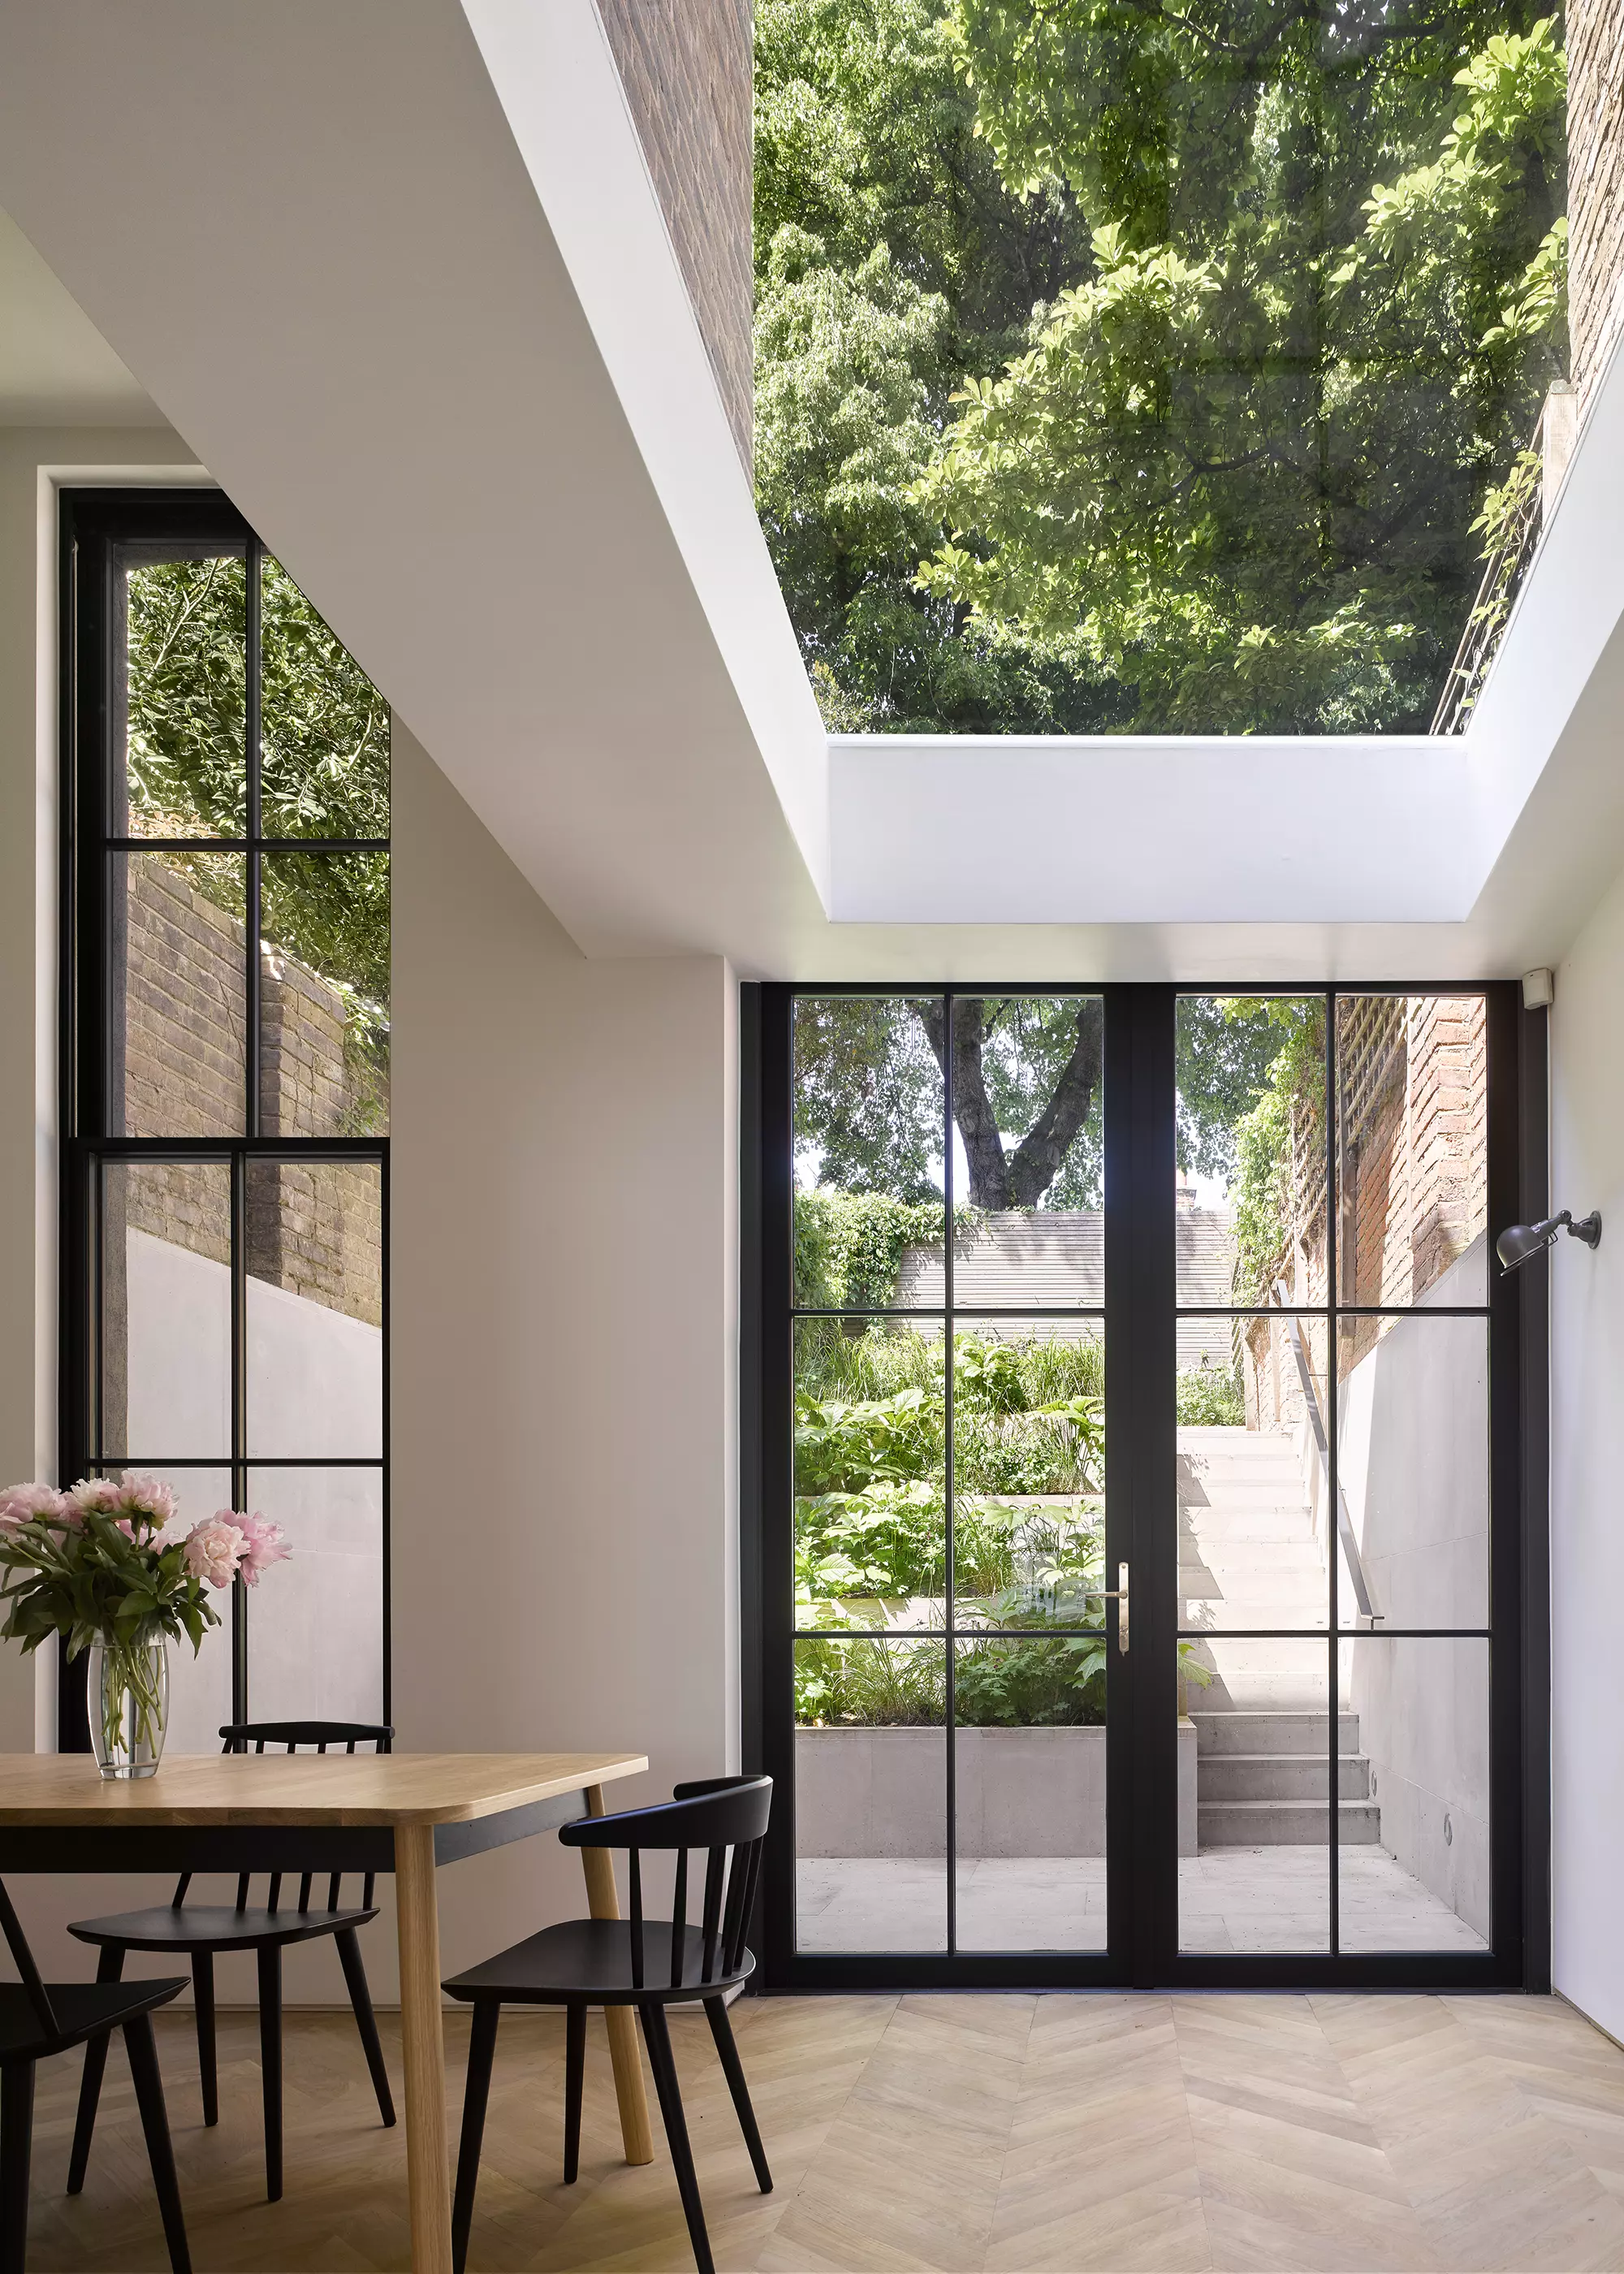 Dining room interior of two-and-a-half storey tower extension at the rear of 1830s grade II listed home in Islington